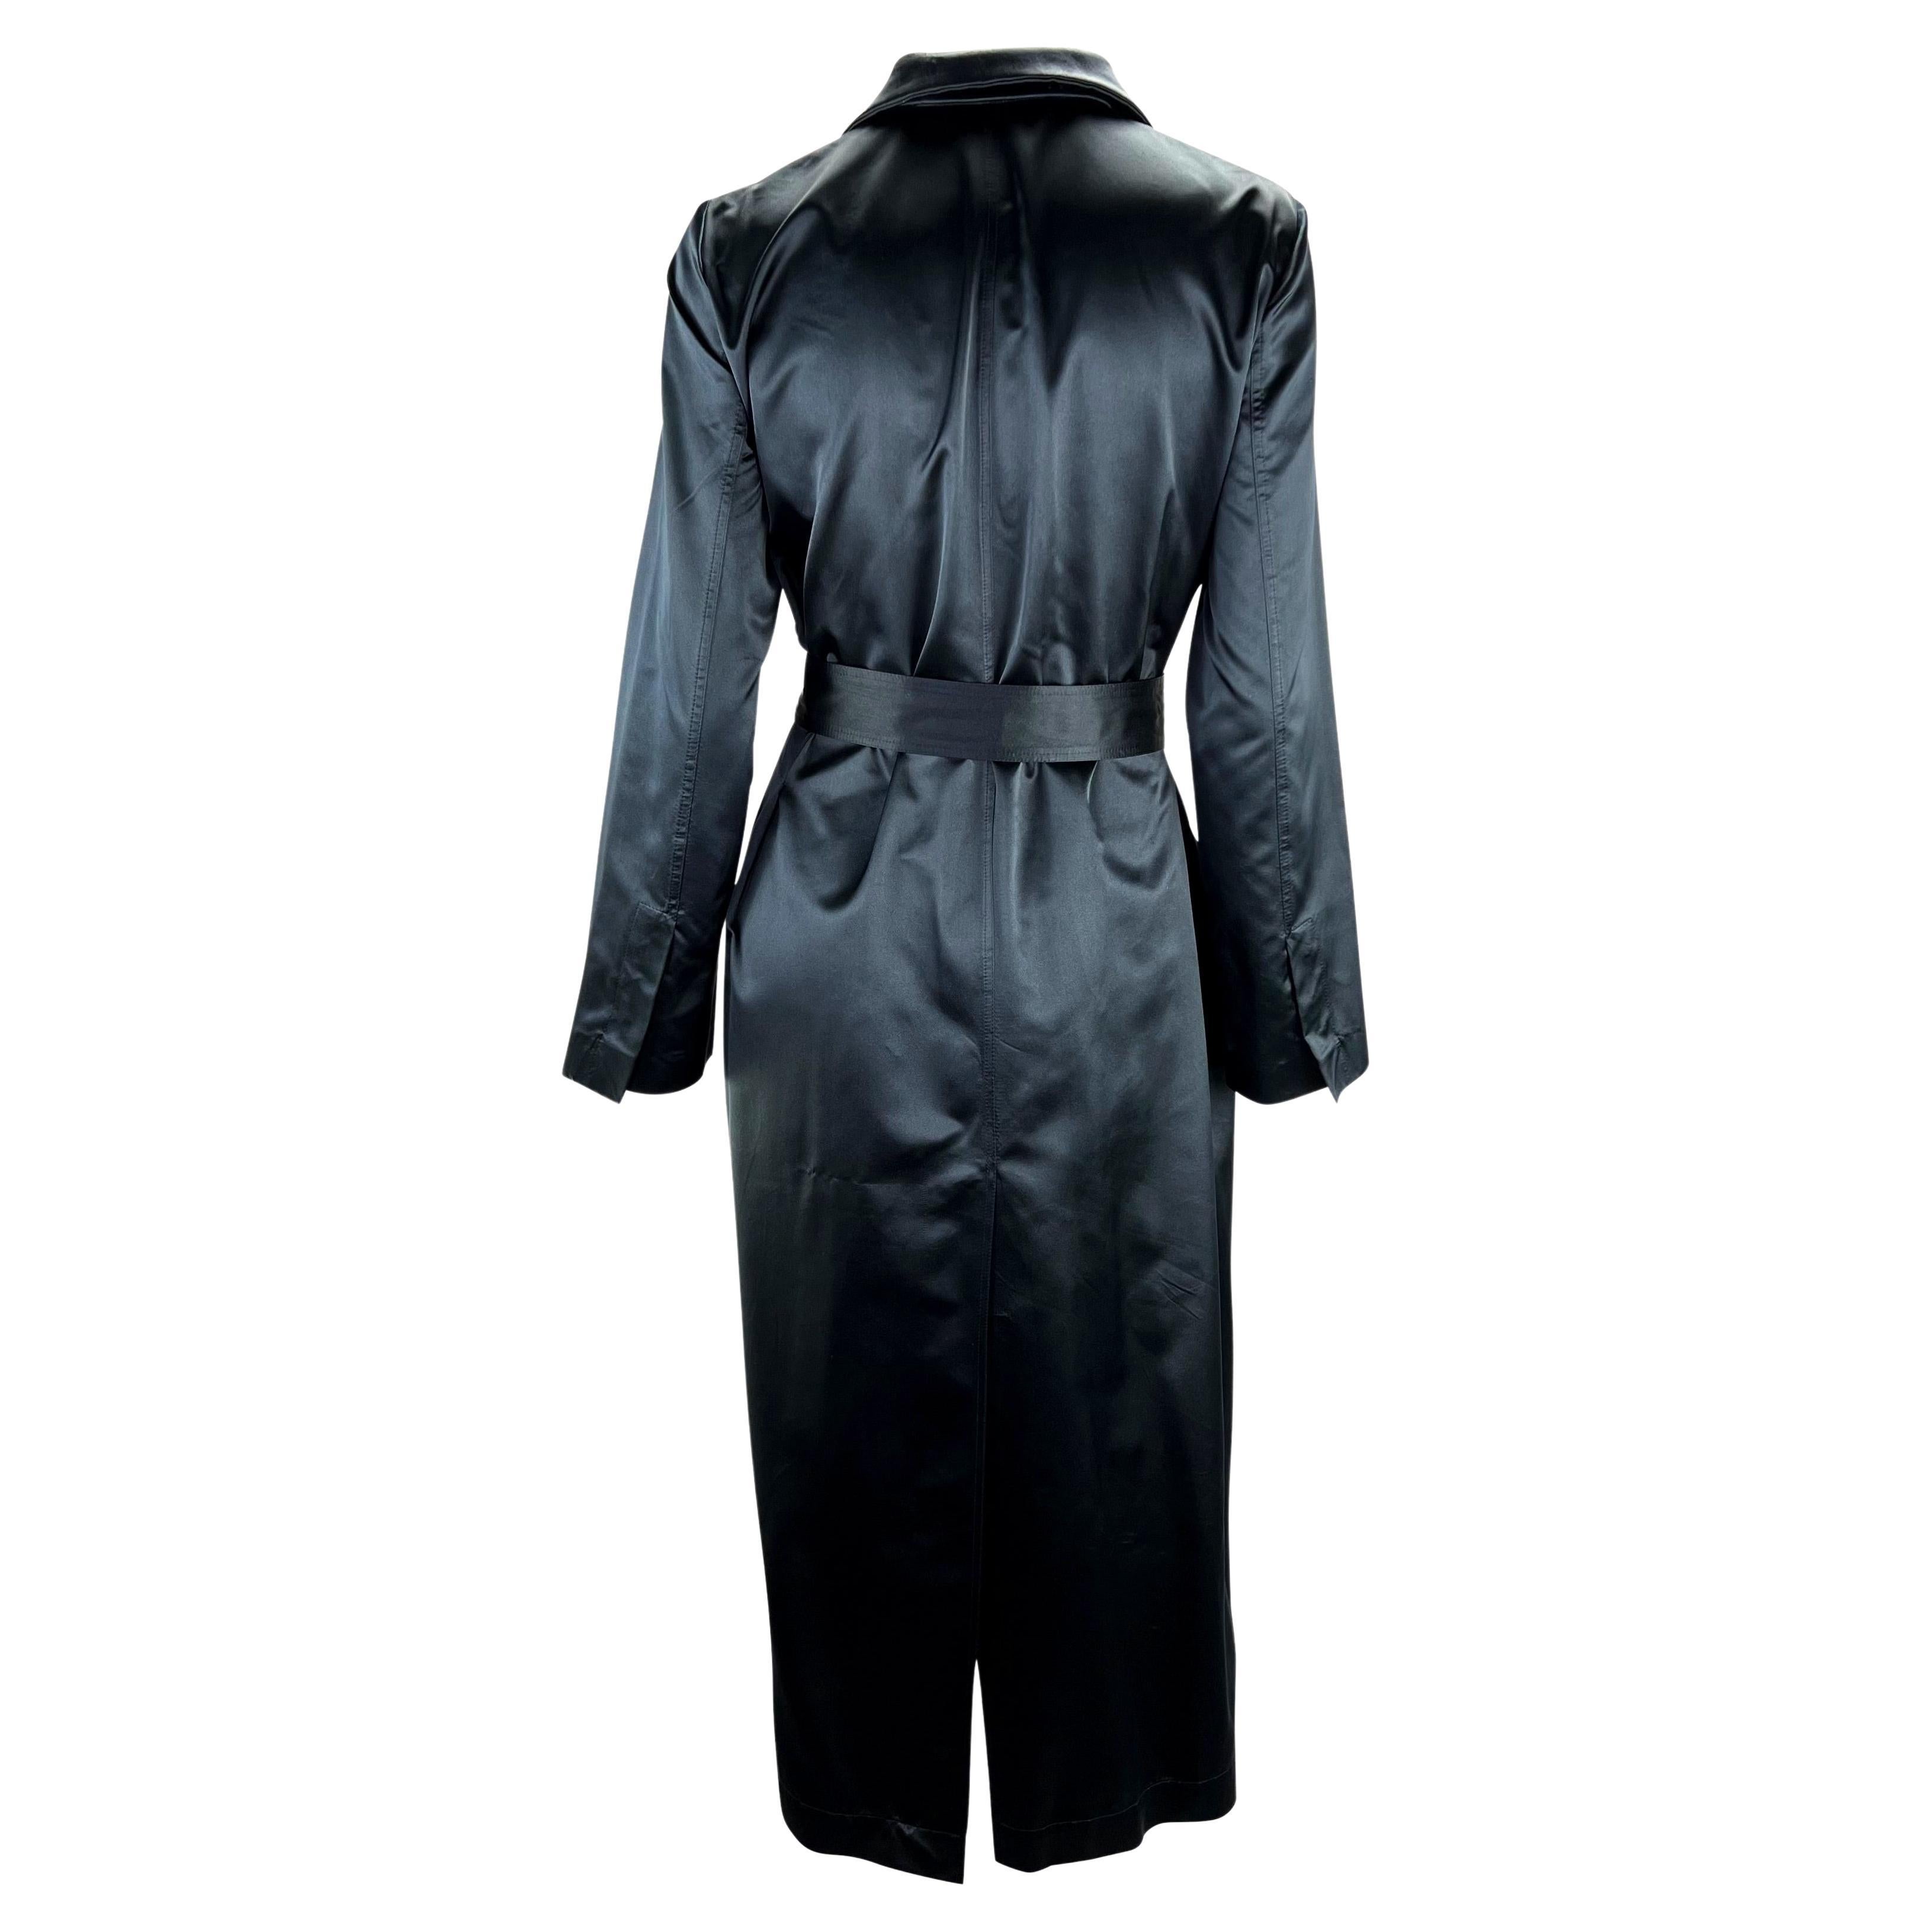 S/S 2001 Gucci by Tom Ford Trench en satin marine en vente 1